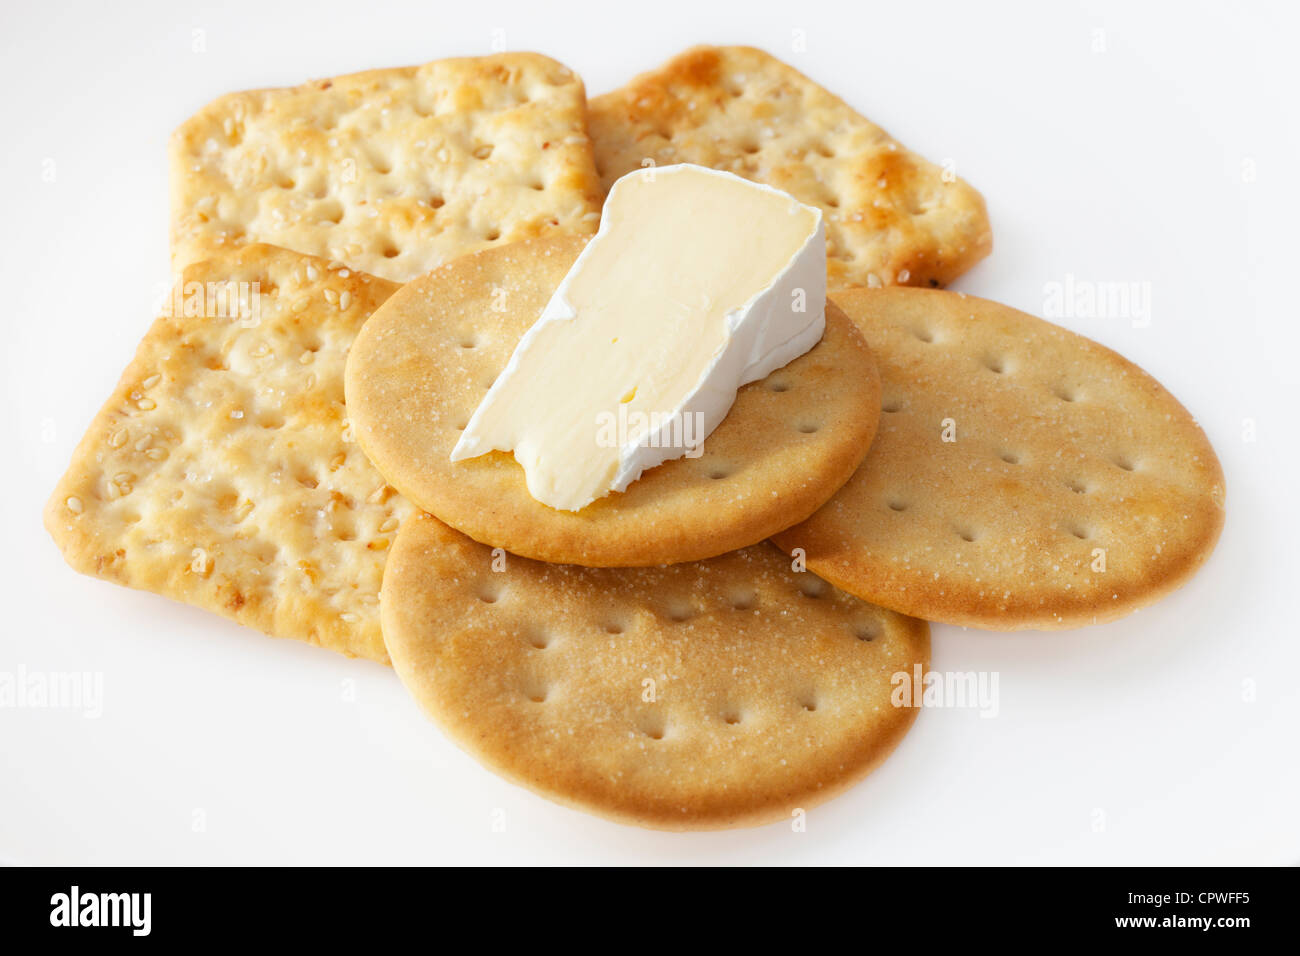 A wedge of camembert cheese on a white plate with crackers. Stock Photo